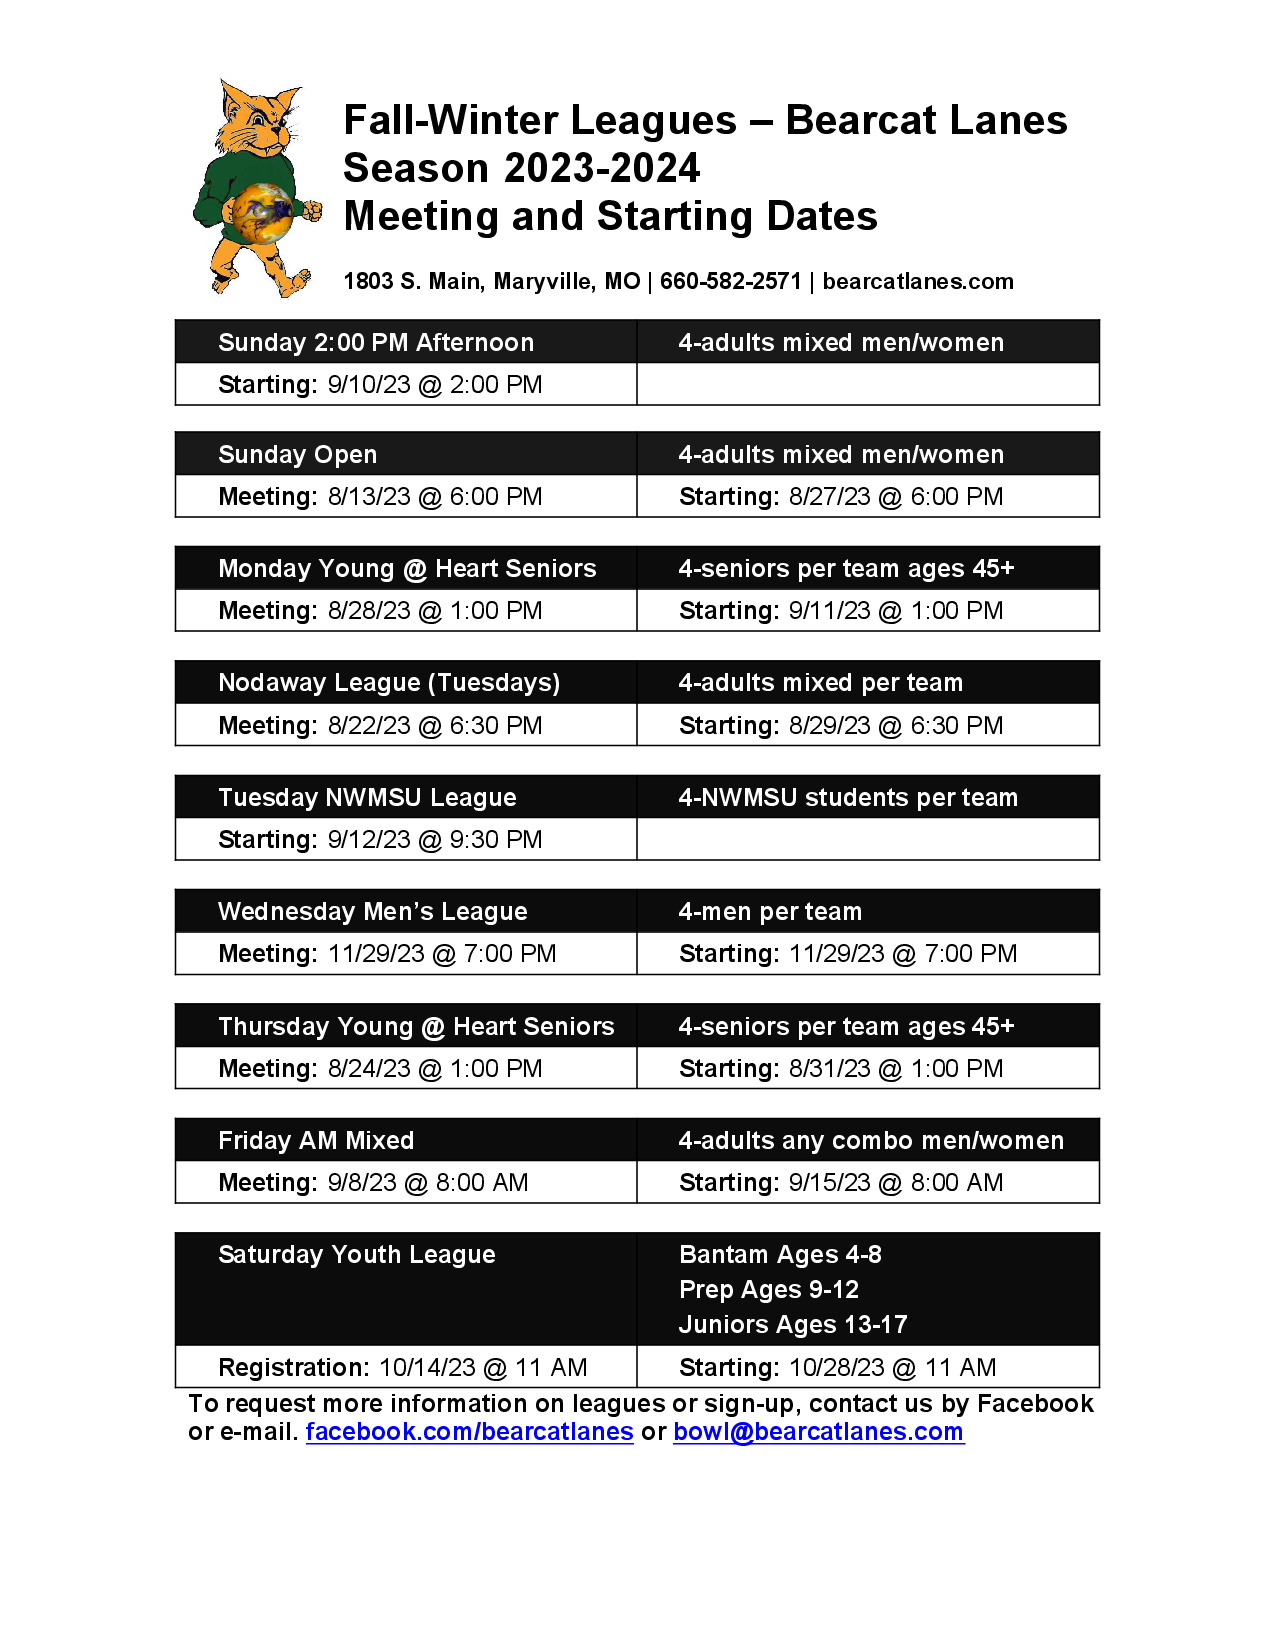 League Meetings and Starting Dates